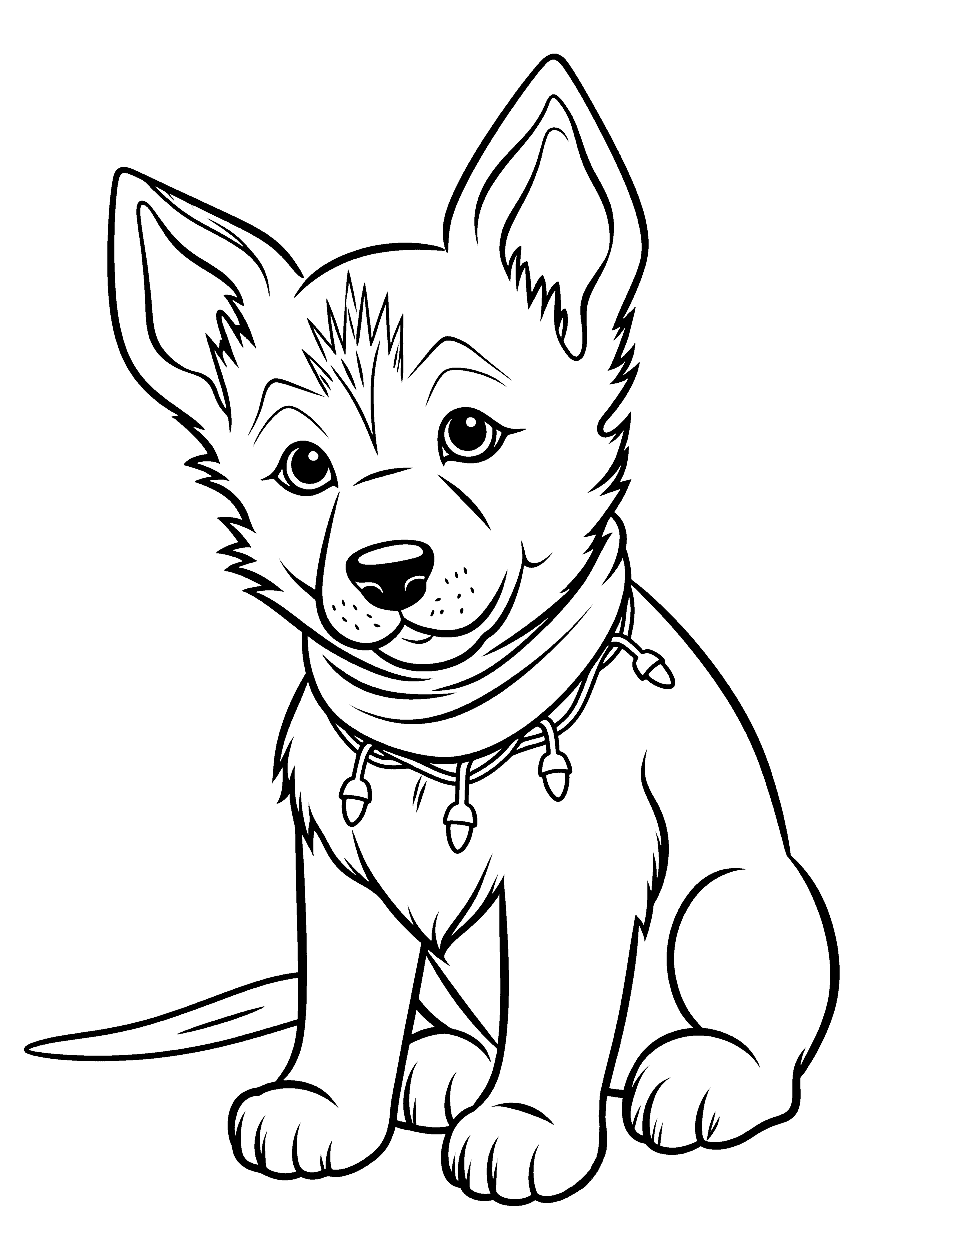 Festive Fun German Shepherd with Christmas Lights Puppy Coloring Page - A German Shepherd puppy entangled in Christmas lights.